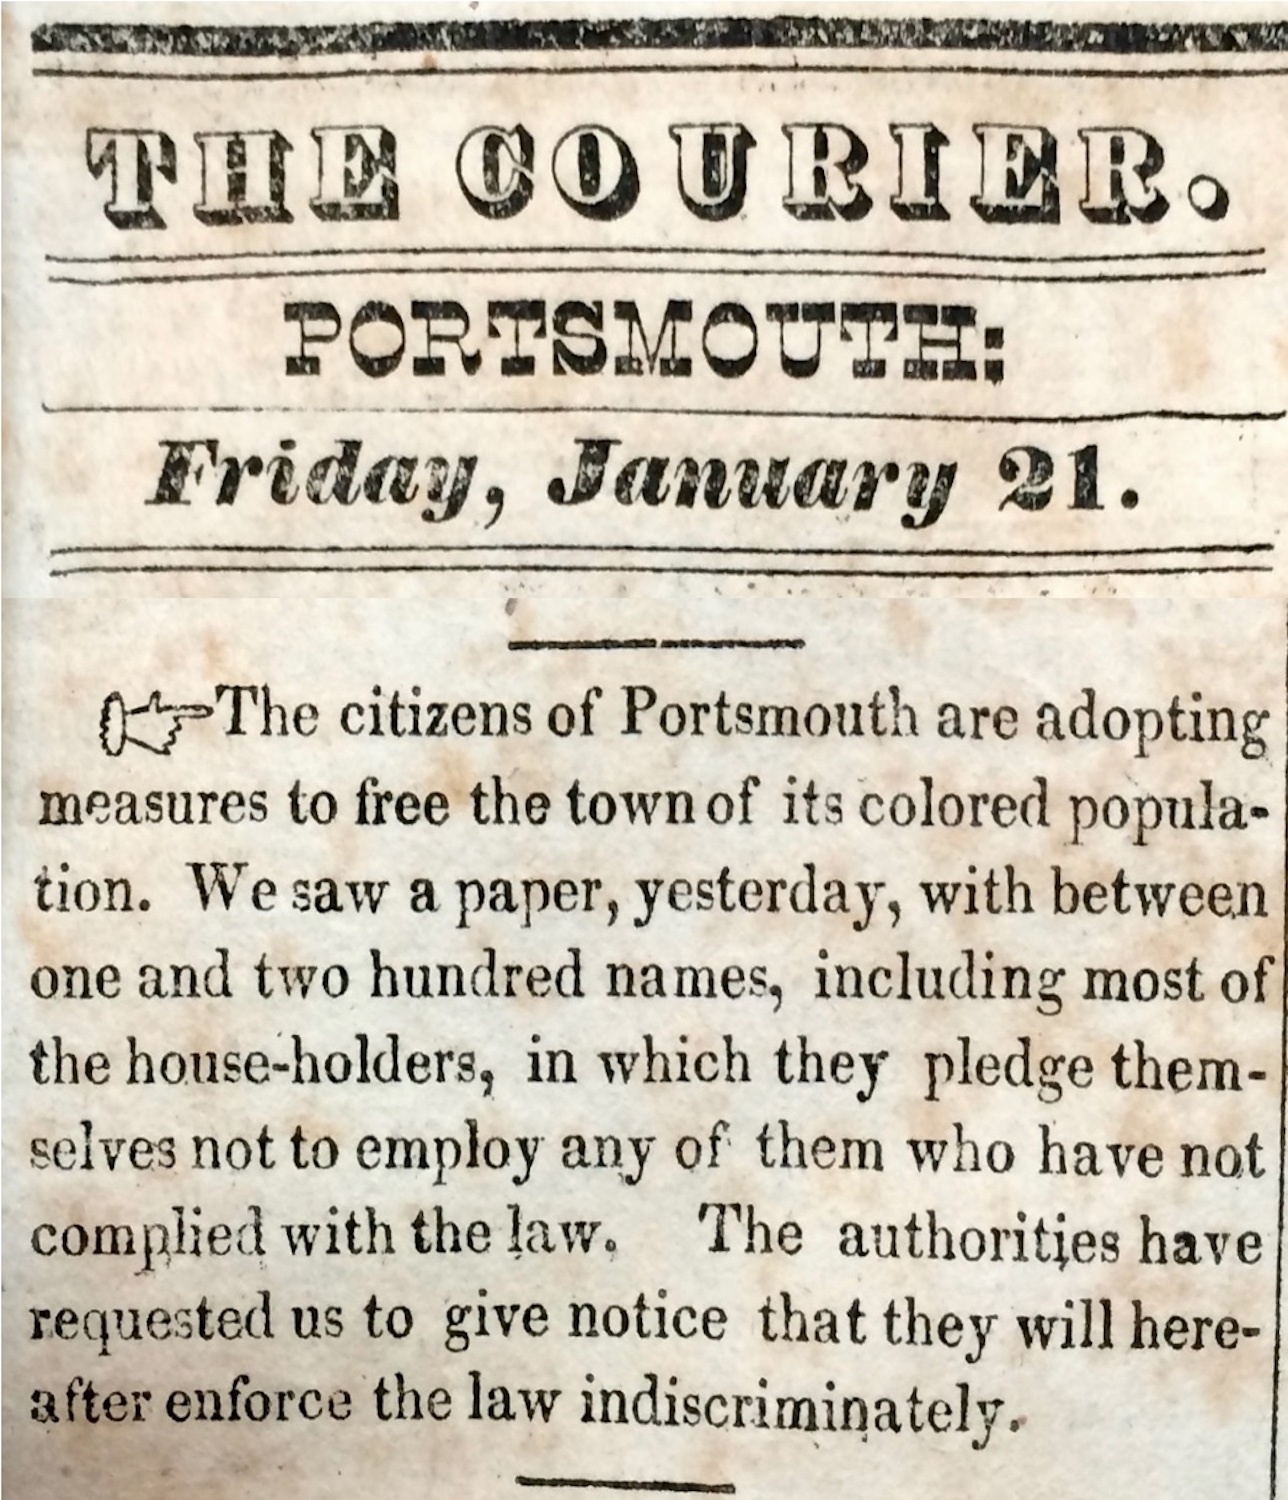 "Black Friday," documented in the Portsmouth Courier (1831)